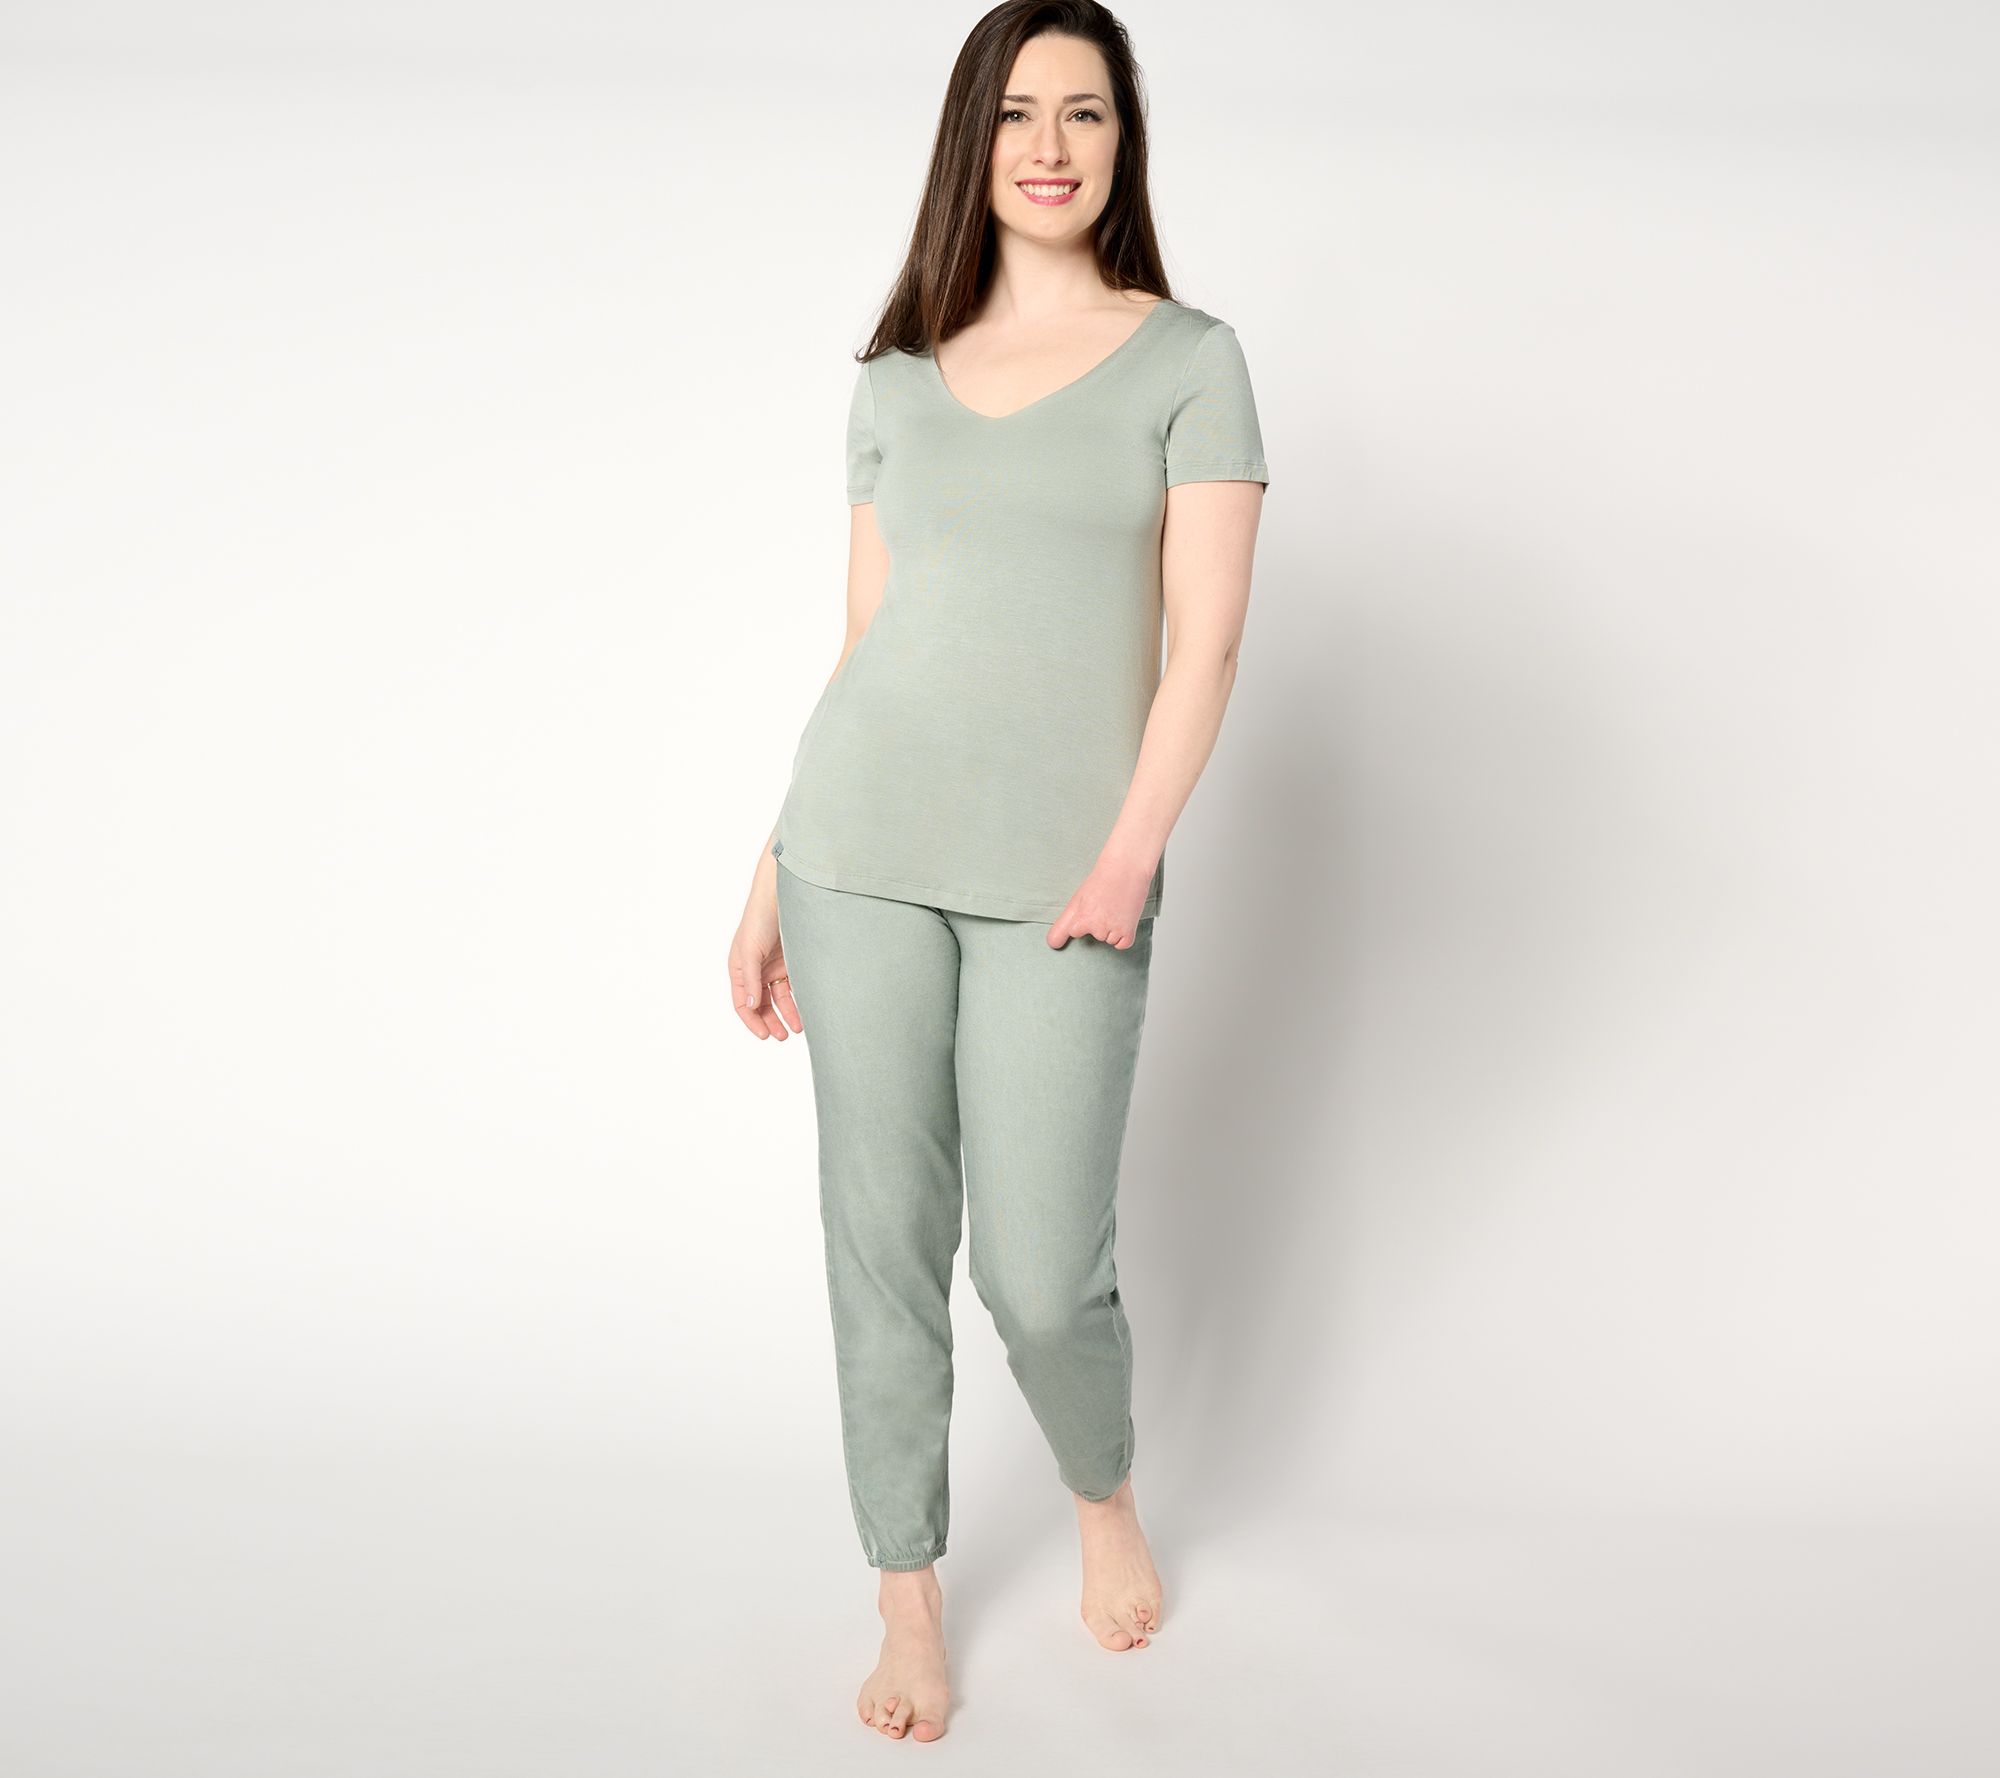 Cotton On launches loungewear set almost identical to Kim